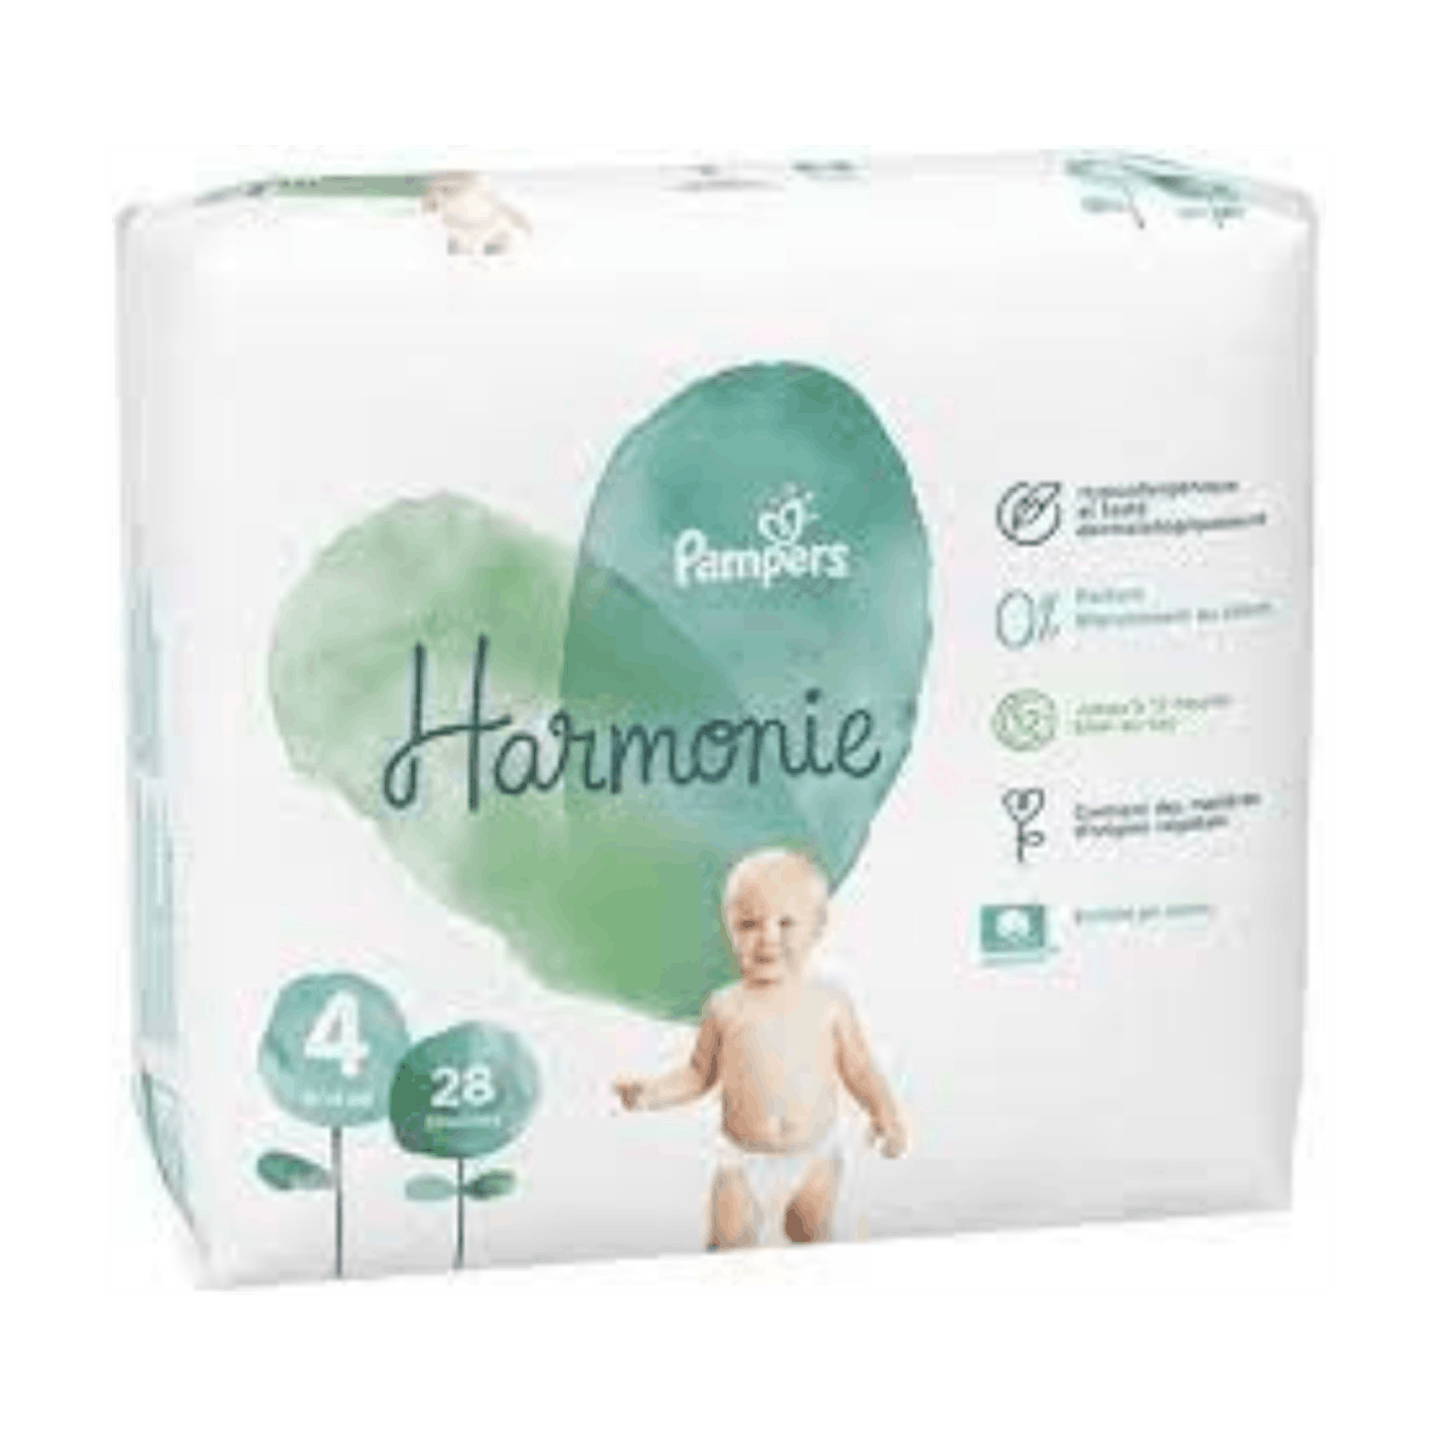 Couches Baby Dry, taille 6, format jumbo, 21 unités – Pampers : Couche